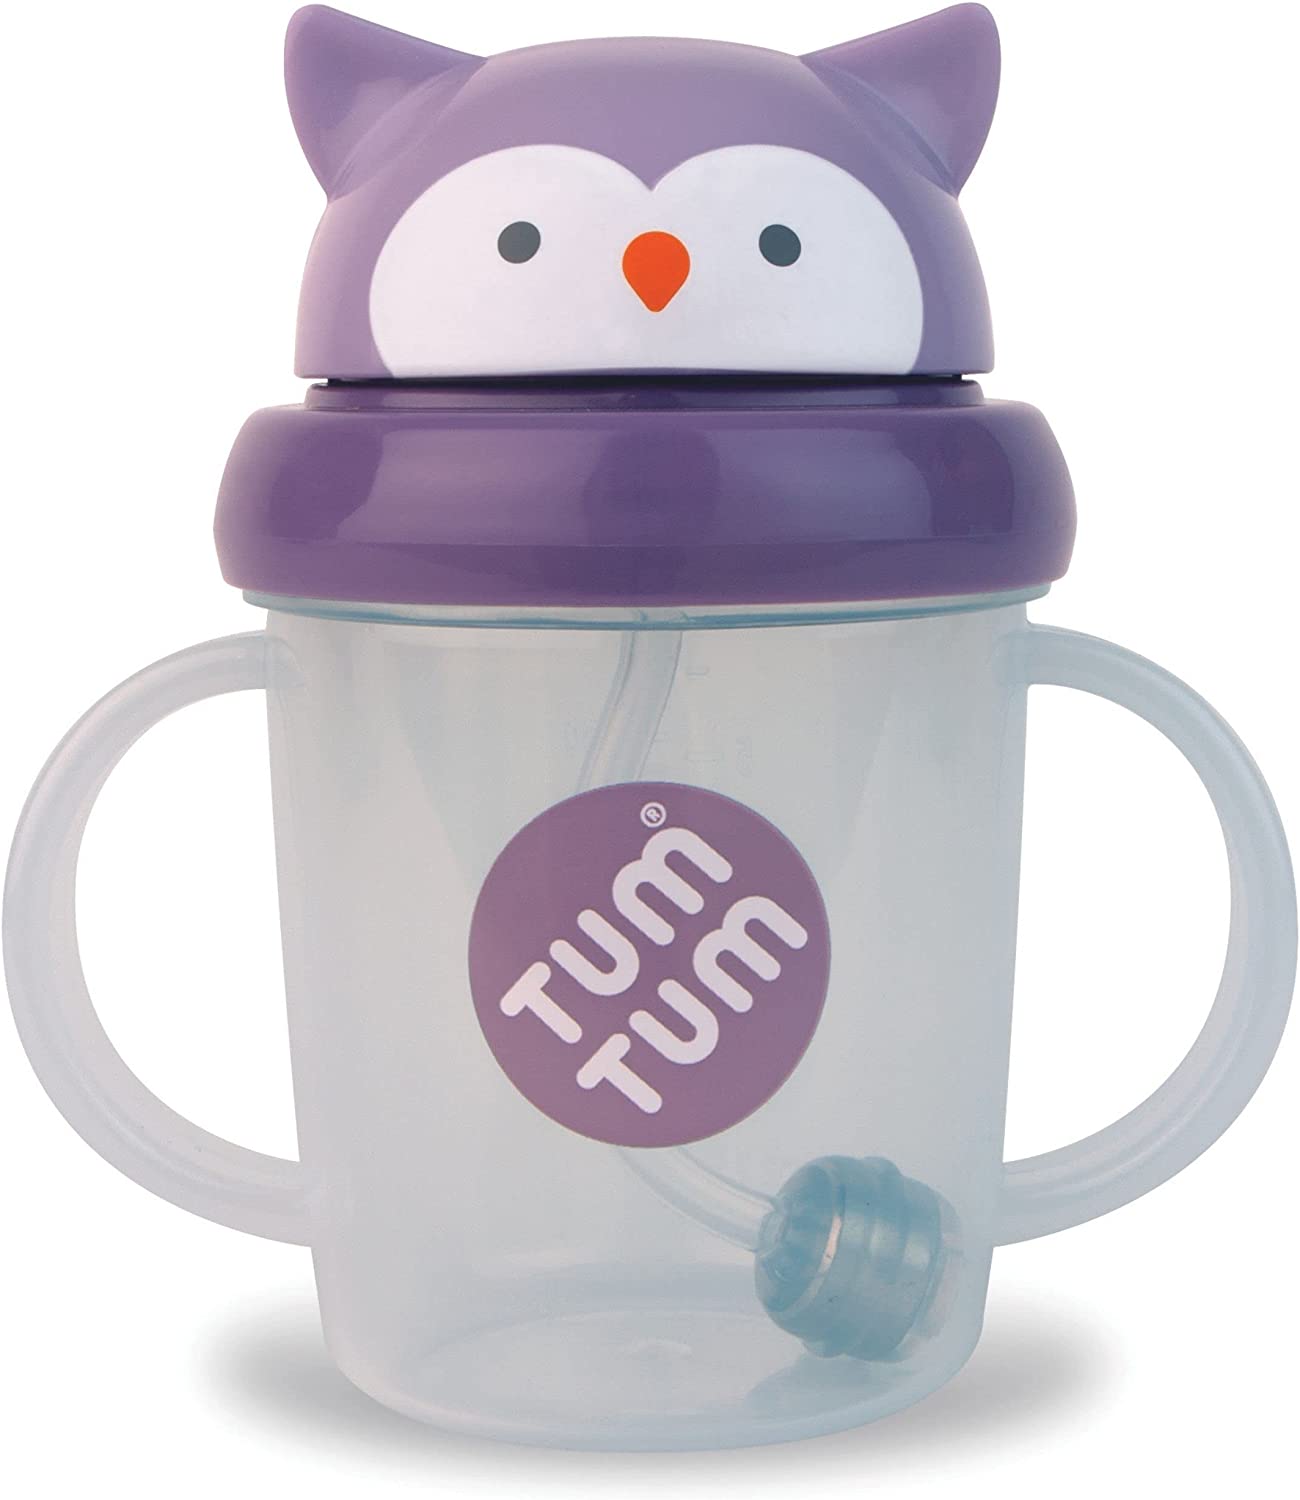 TUM TUM - Tippy Up Free Flow Sippy Cup